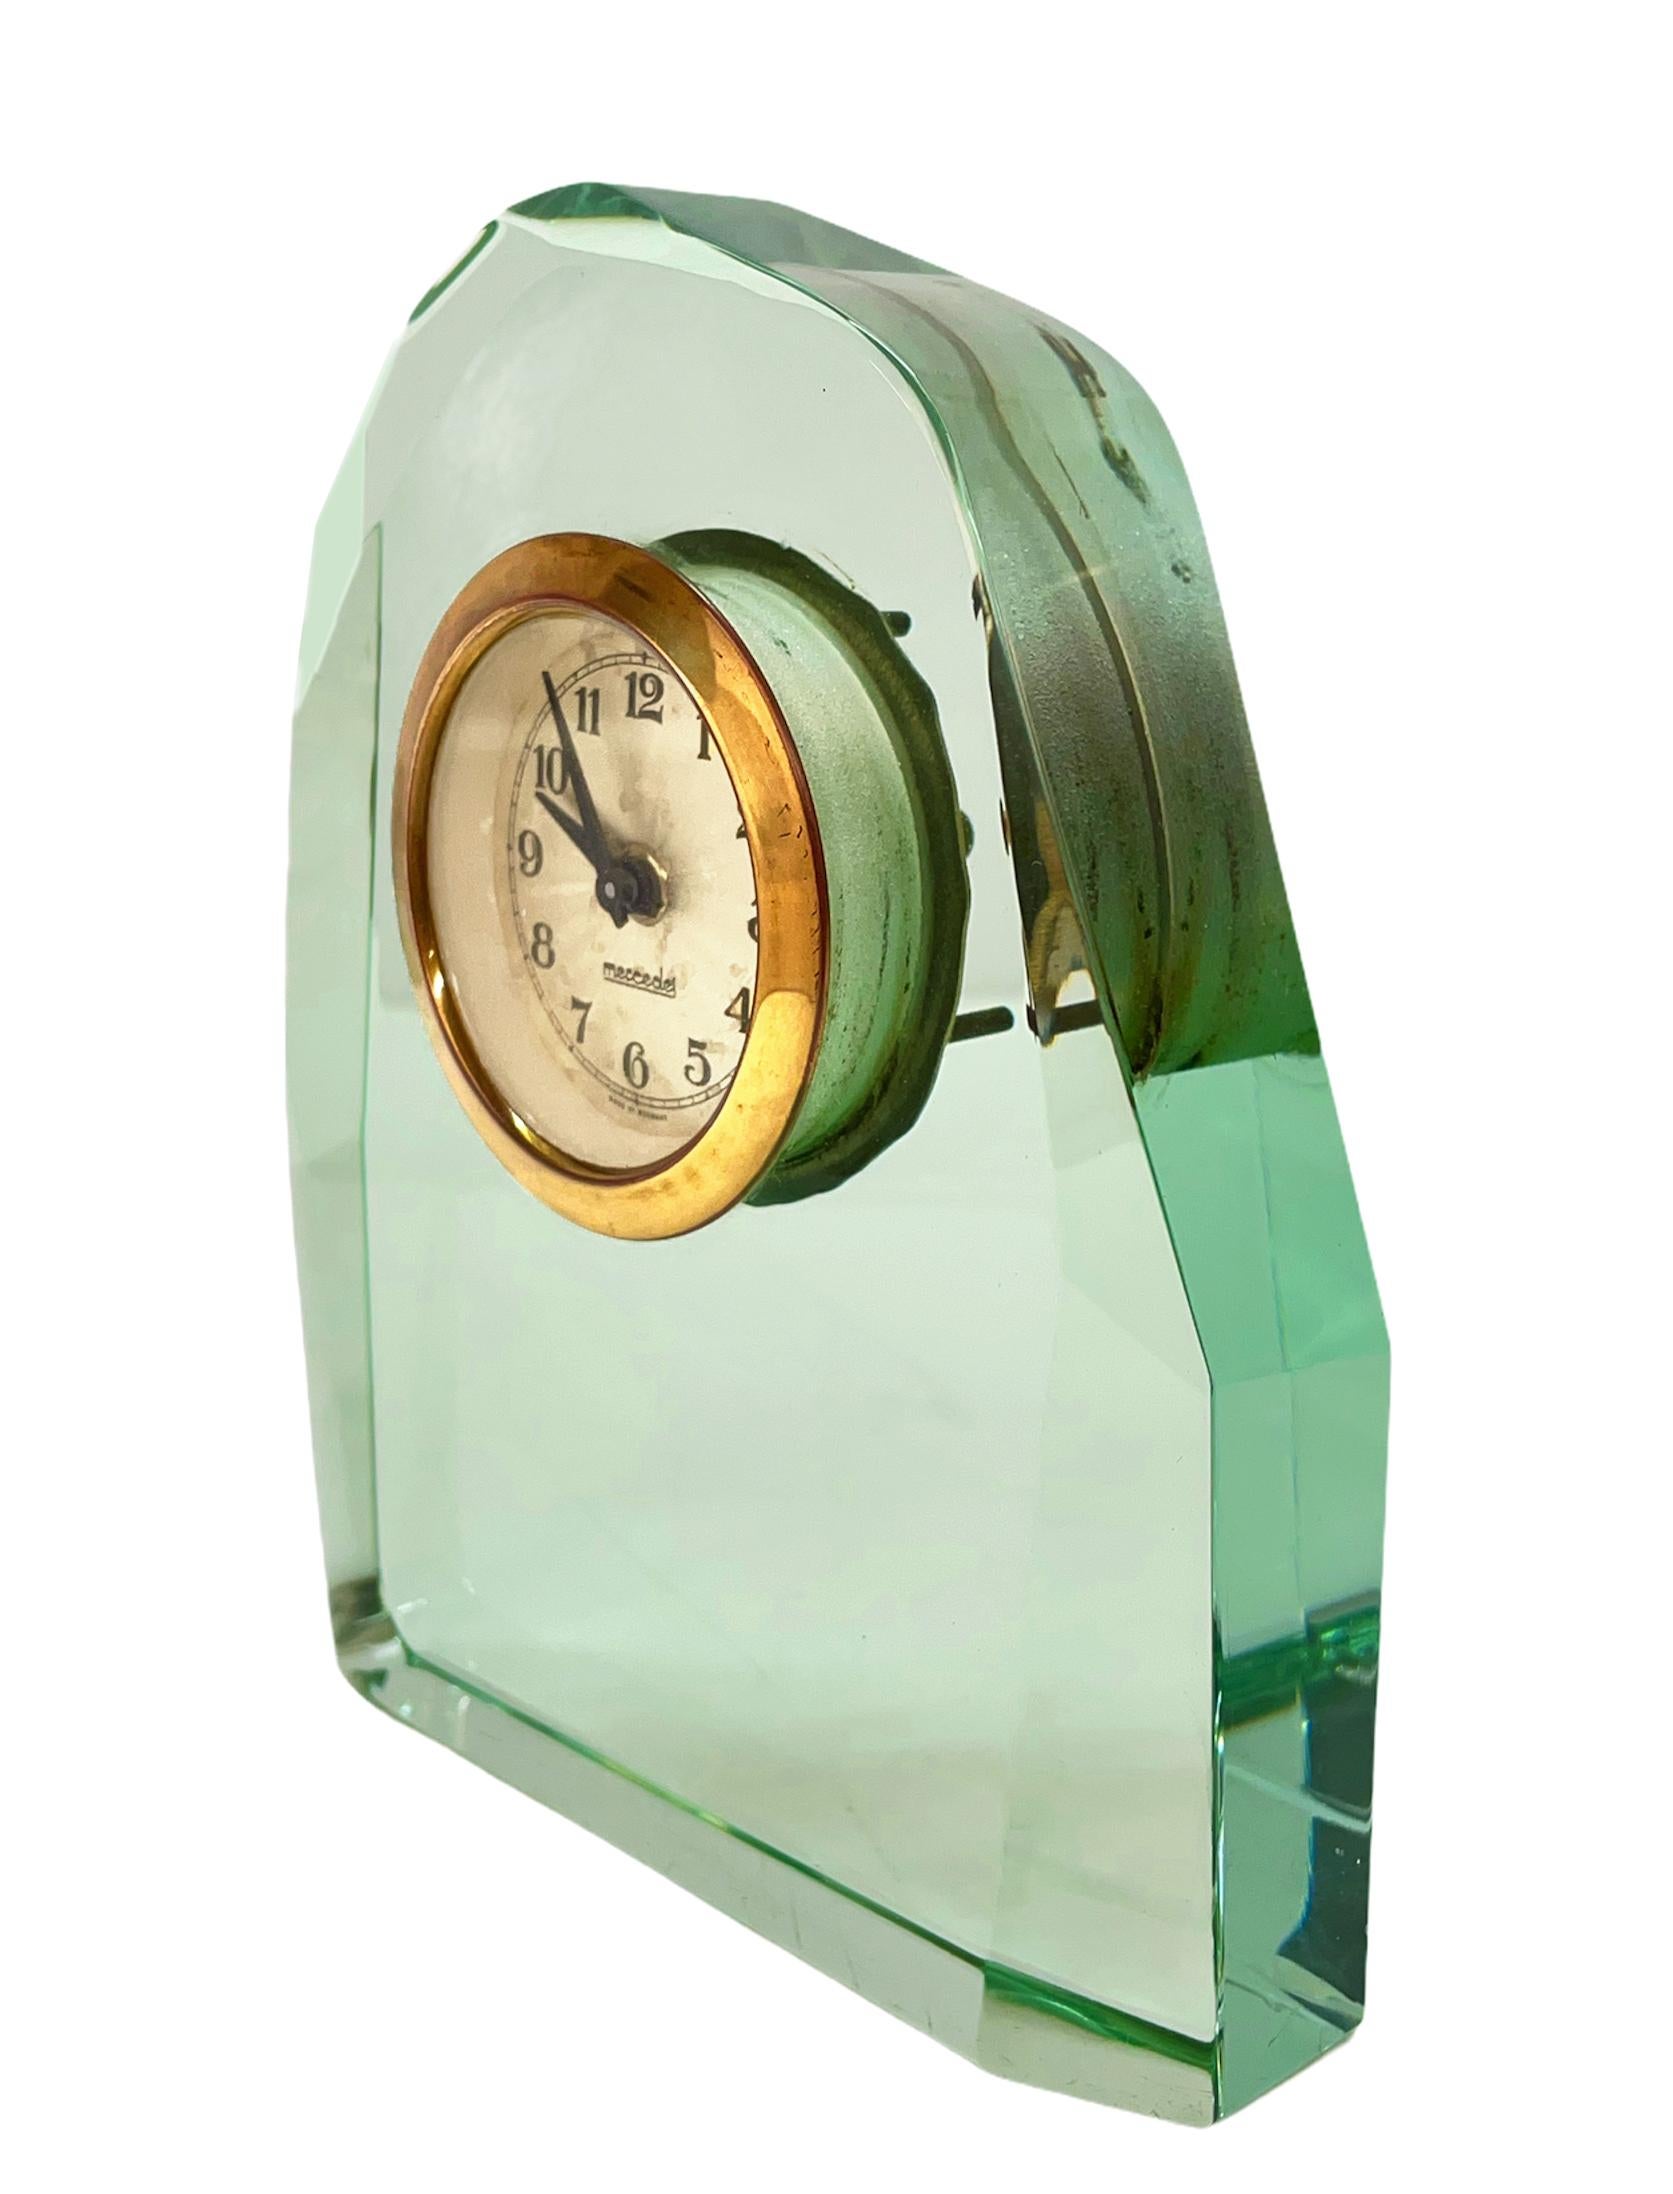 Amazing midcentury crystal glass table clock. This fantastic piece was designed by Fontana Arte for Mercedes during the 1950s in Italy.

This amazing desk clock has an irregular faceted crystal glass has a fantastic dial of the guilloche watch with